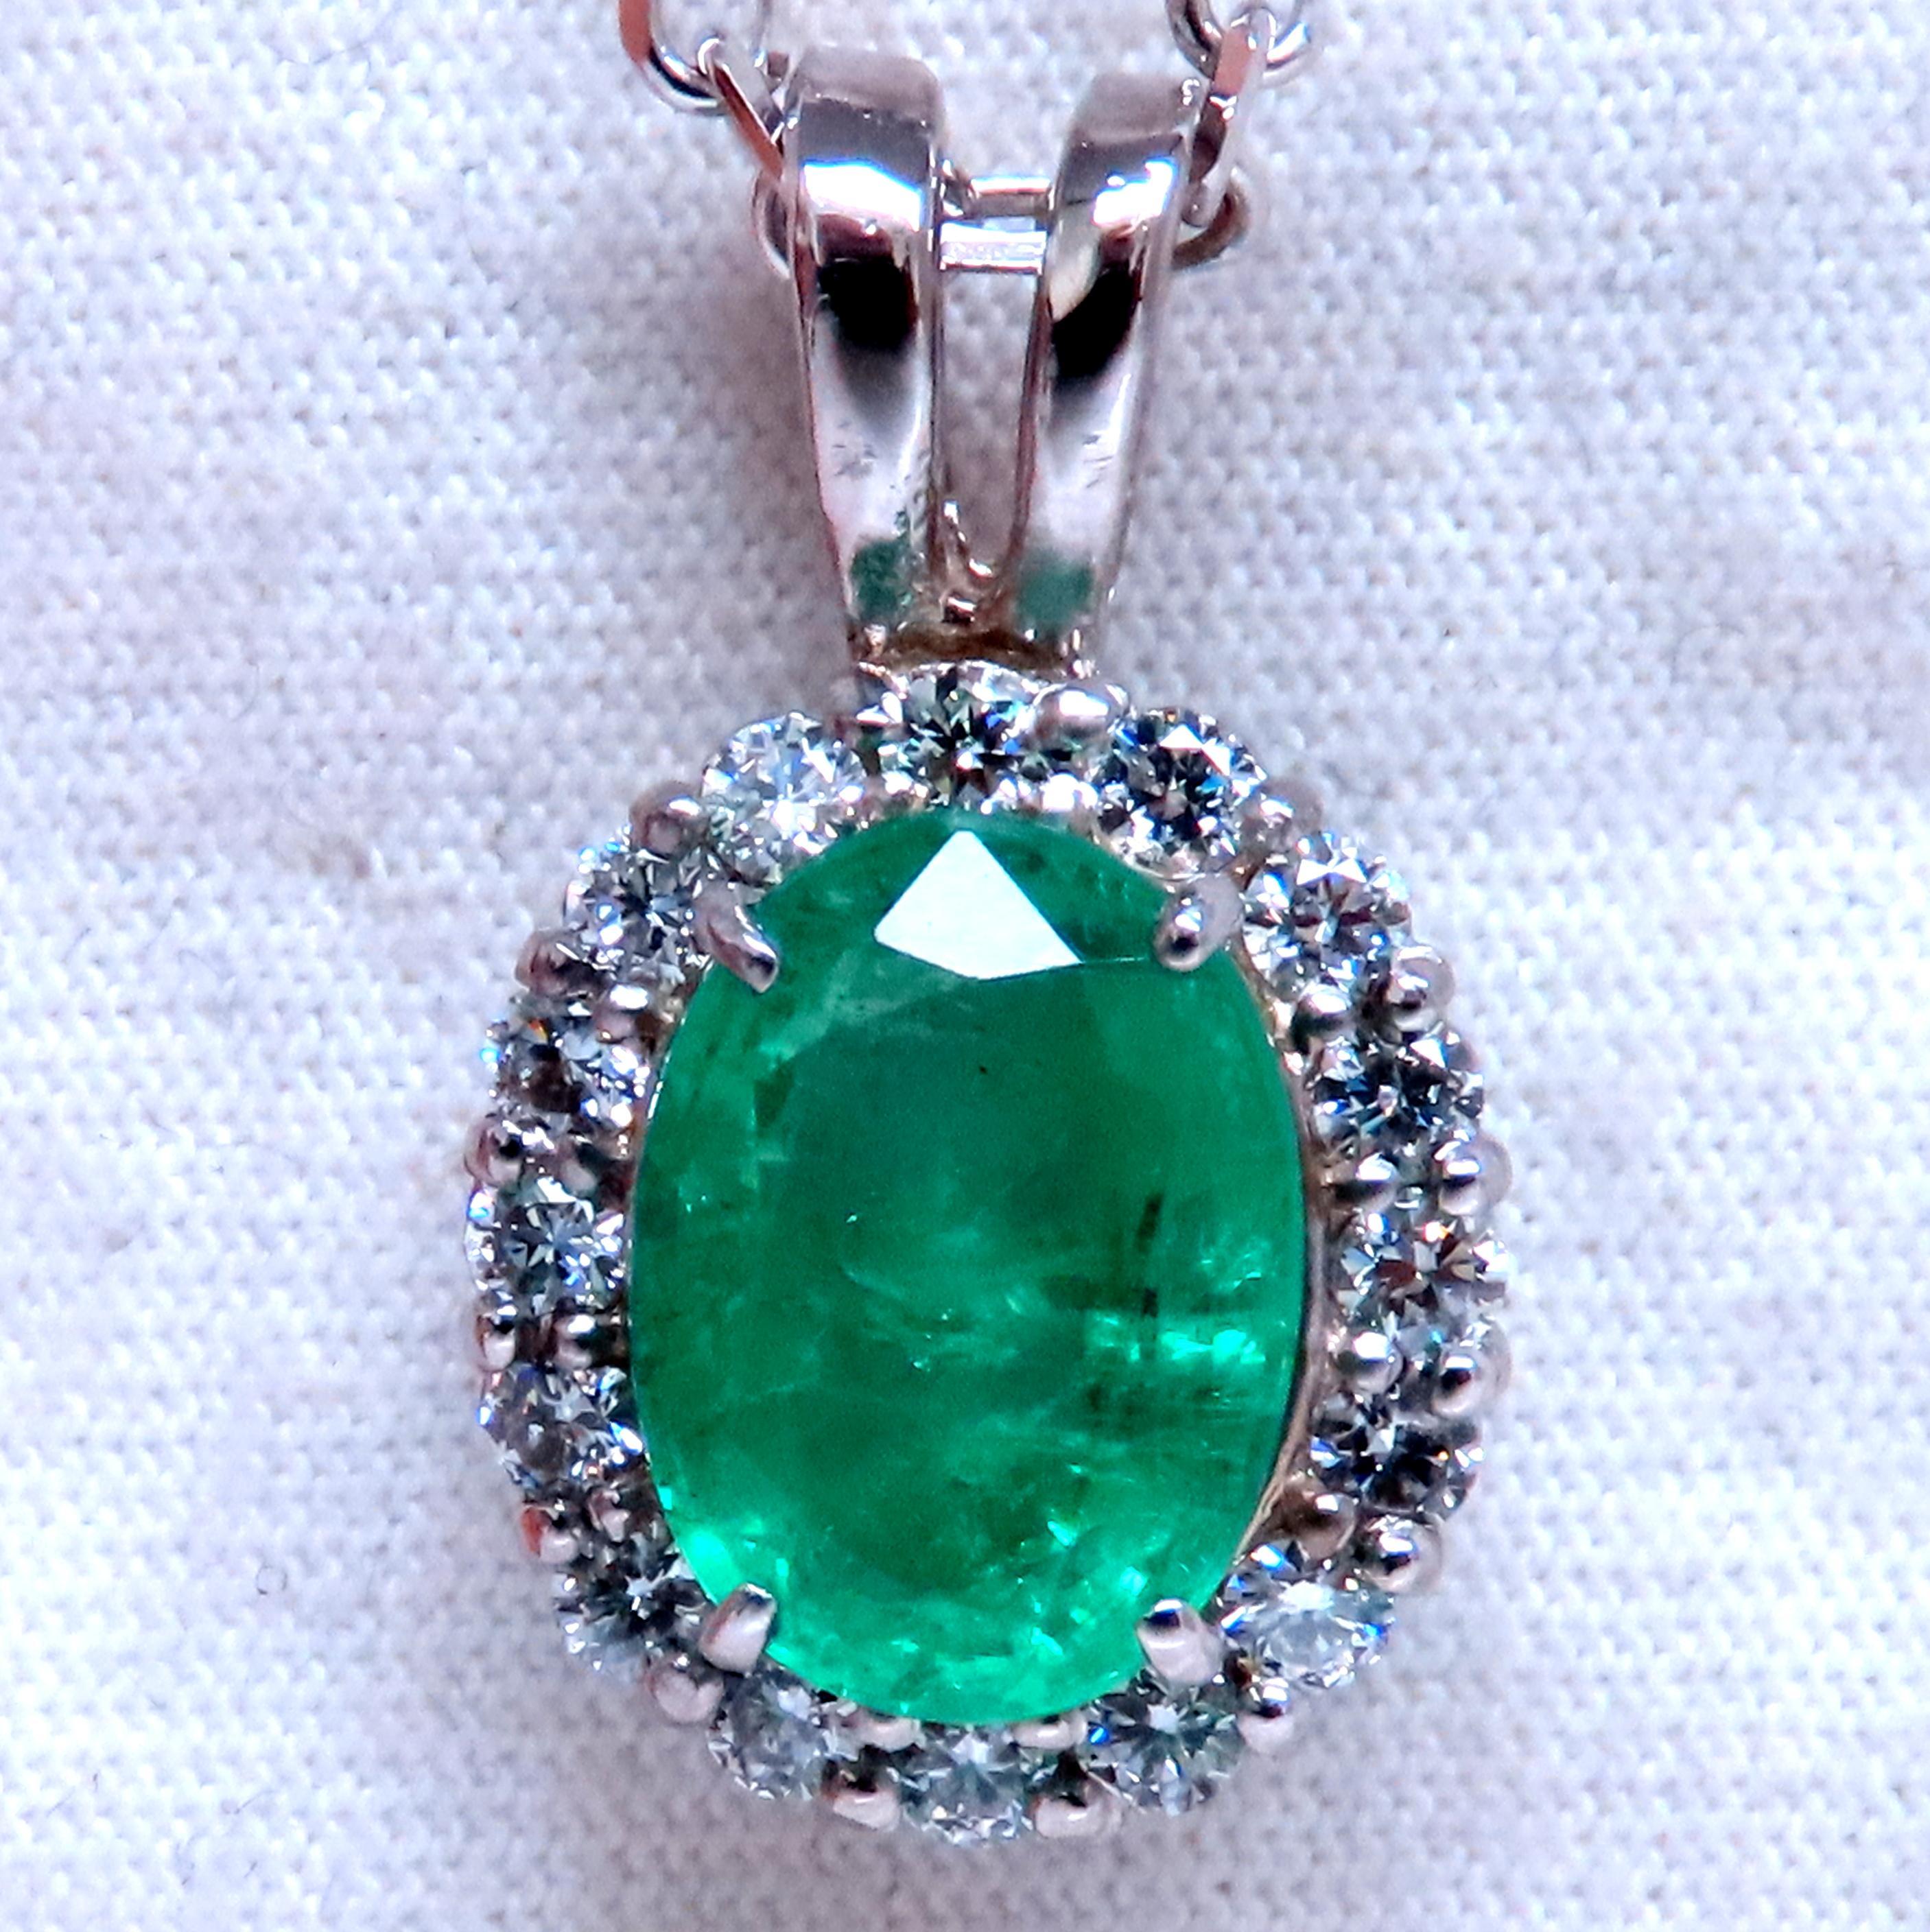 Natural Emerald Diamond Necklace

3.24ct Natural Oval Emerald
11 x 8 mm
Clean Clarity & Transparent

.70ct Natural Diamonds.
Rounds G-color Vs-2 clarity.

14kt white gold.
20 inches long
21 x 13mm
9.8 grams